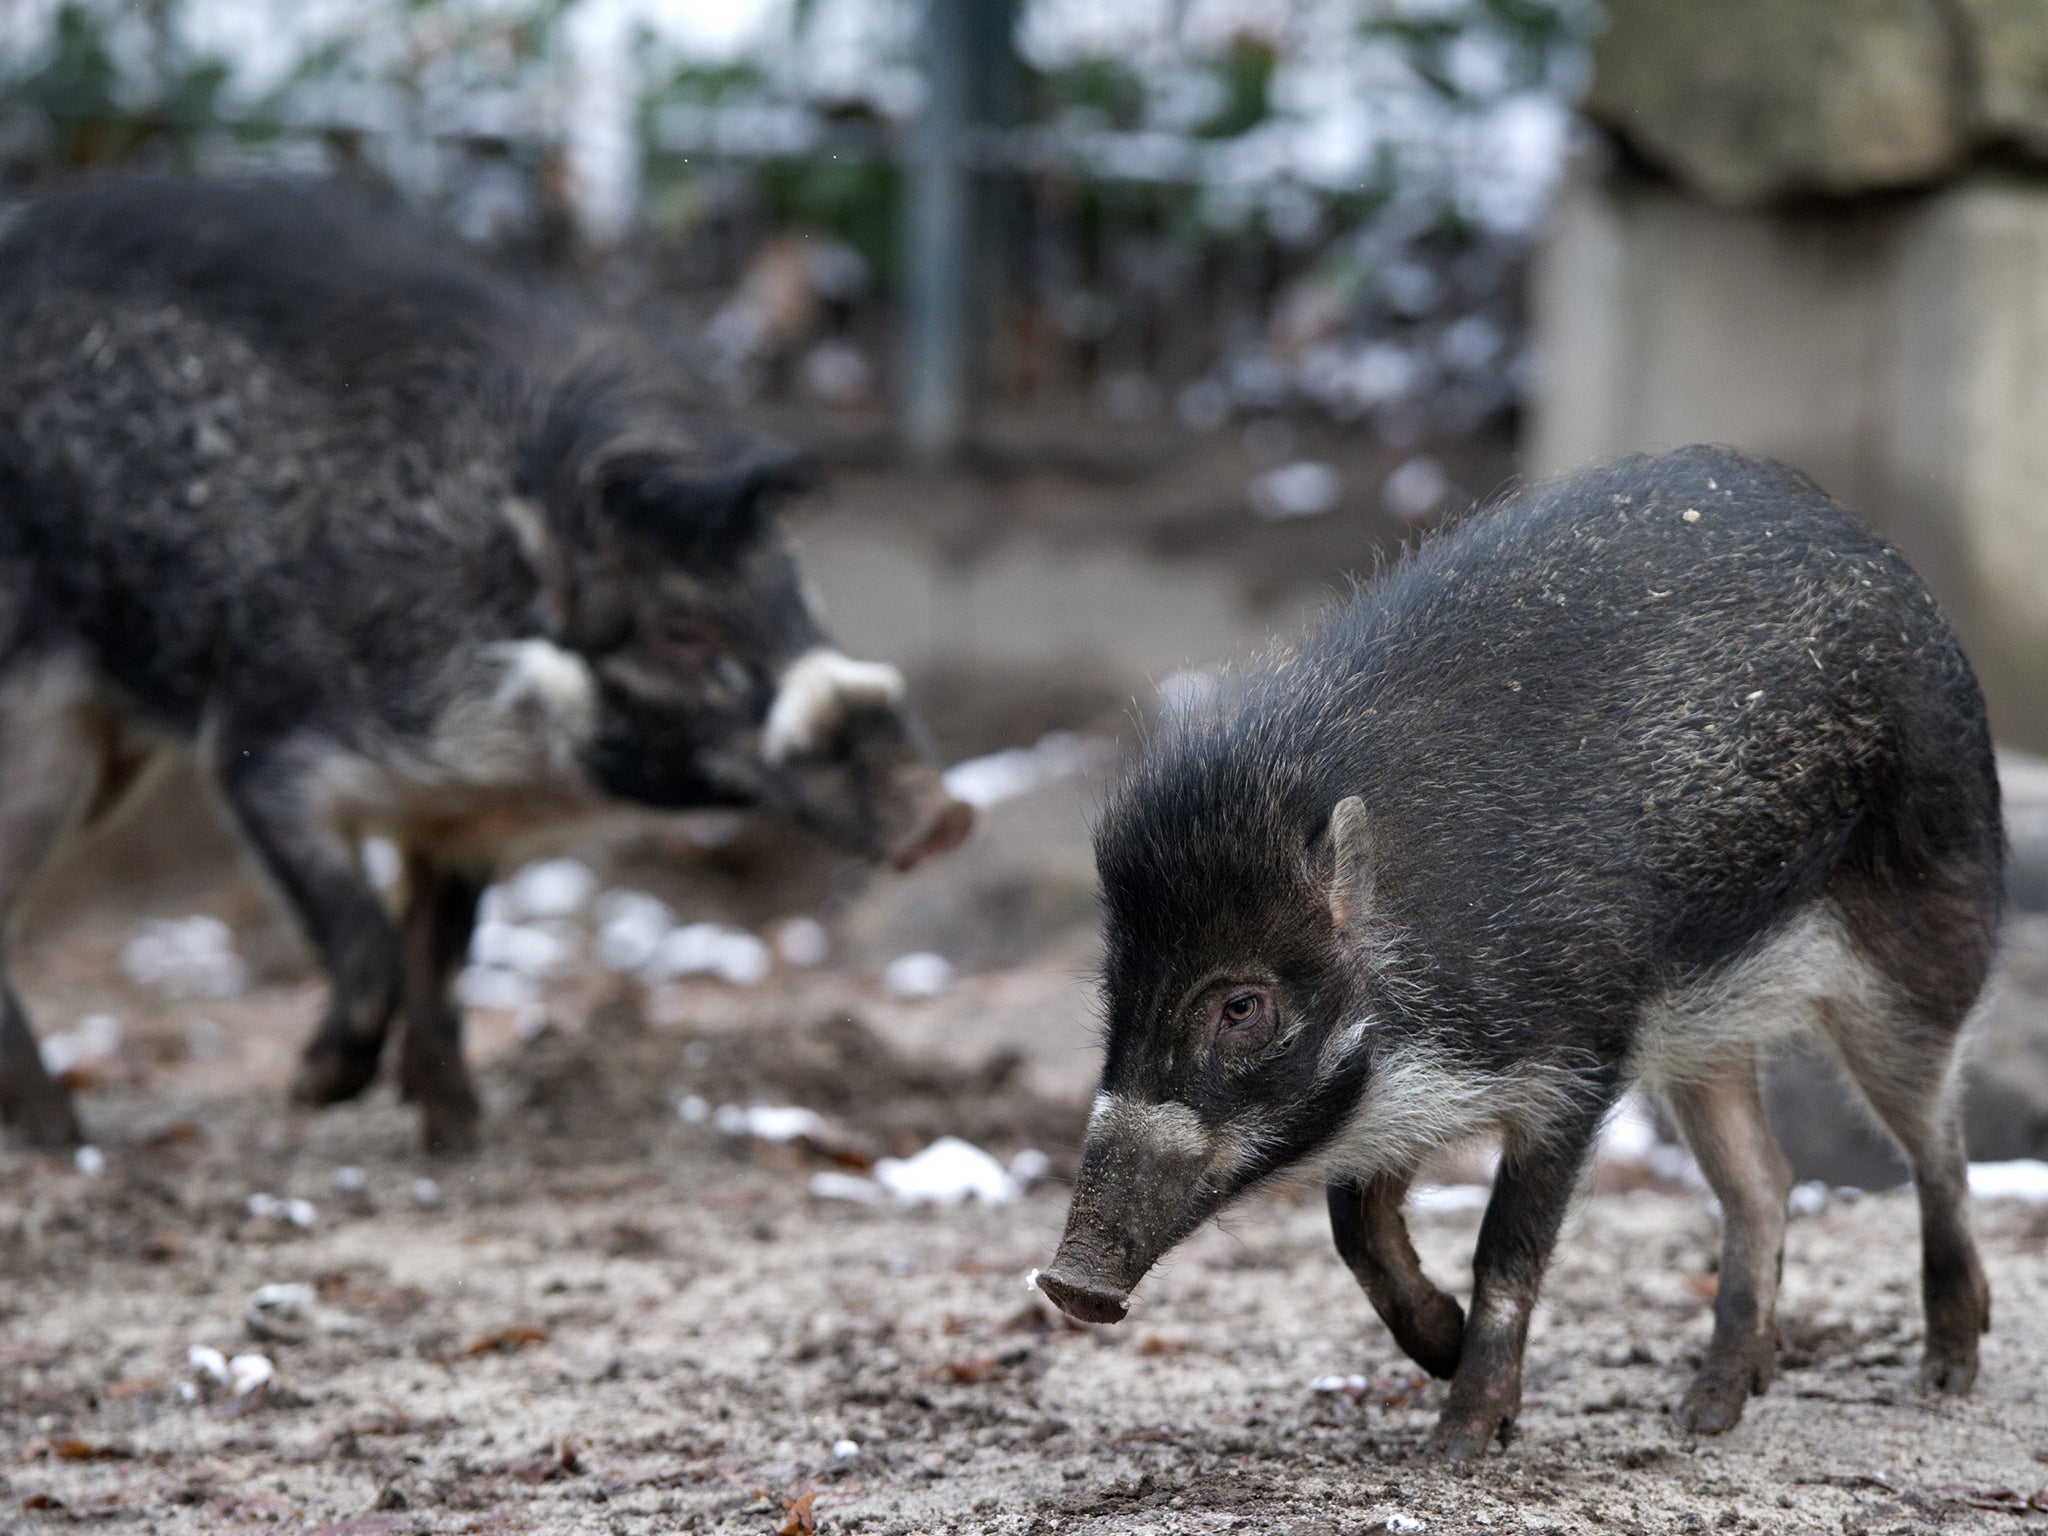 Revelations reveal that an entire litter of critically endangered Visayan warty pigs were eaten by their father the day they were born at Bristol Zoo. The mother, ‘Manilla’, had to be euthanised after being attacked by the male warty pig ‘Elvis’